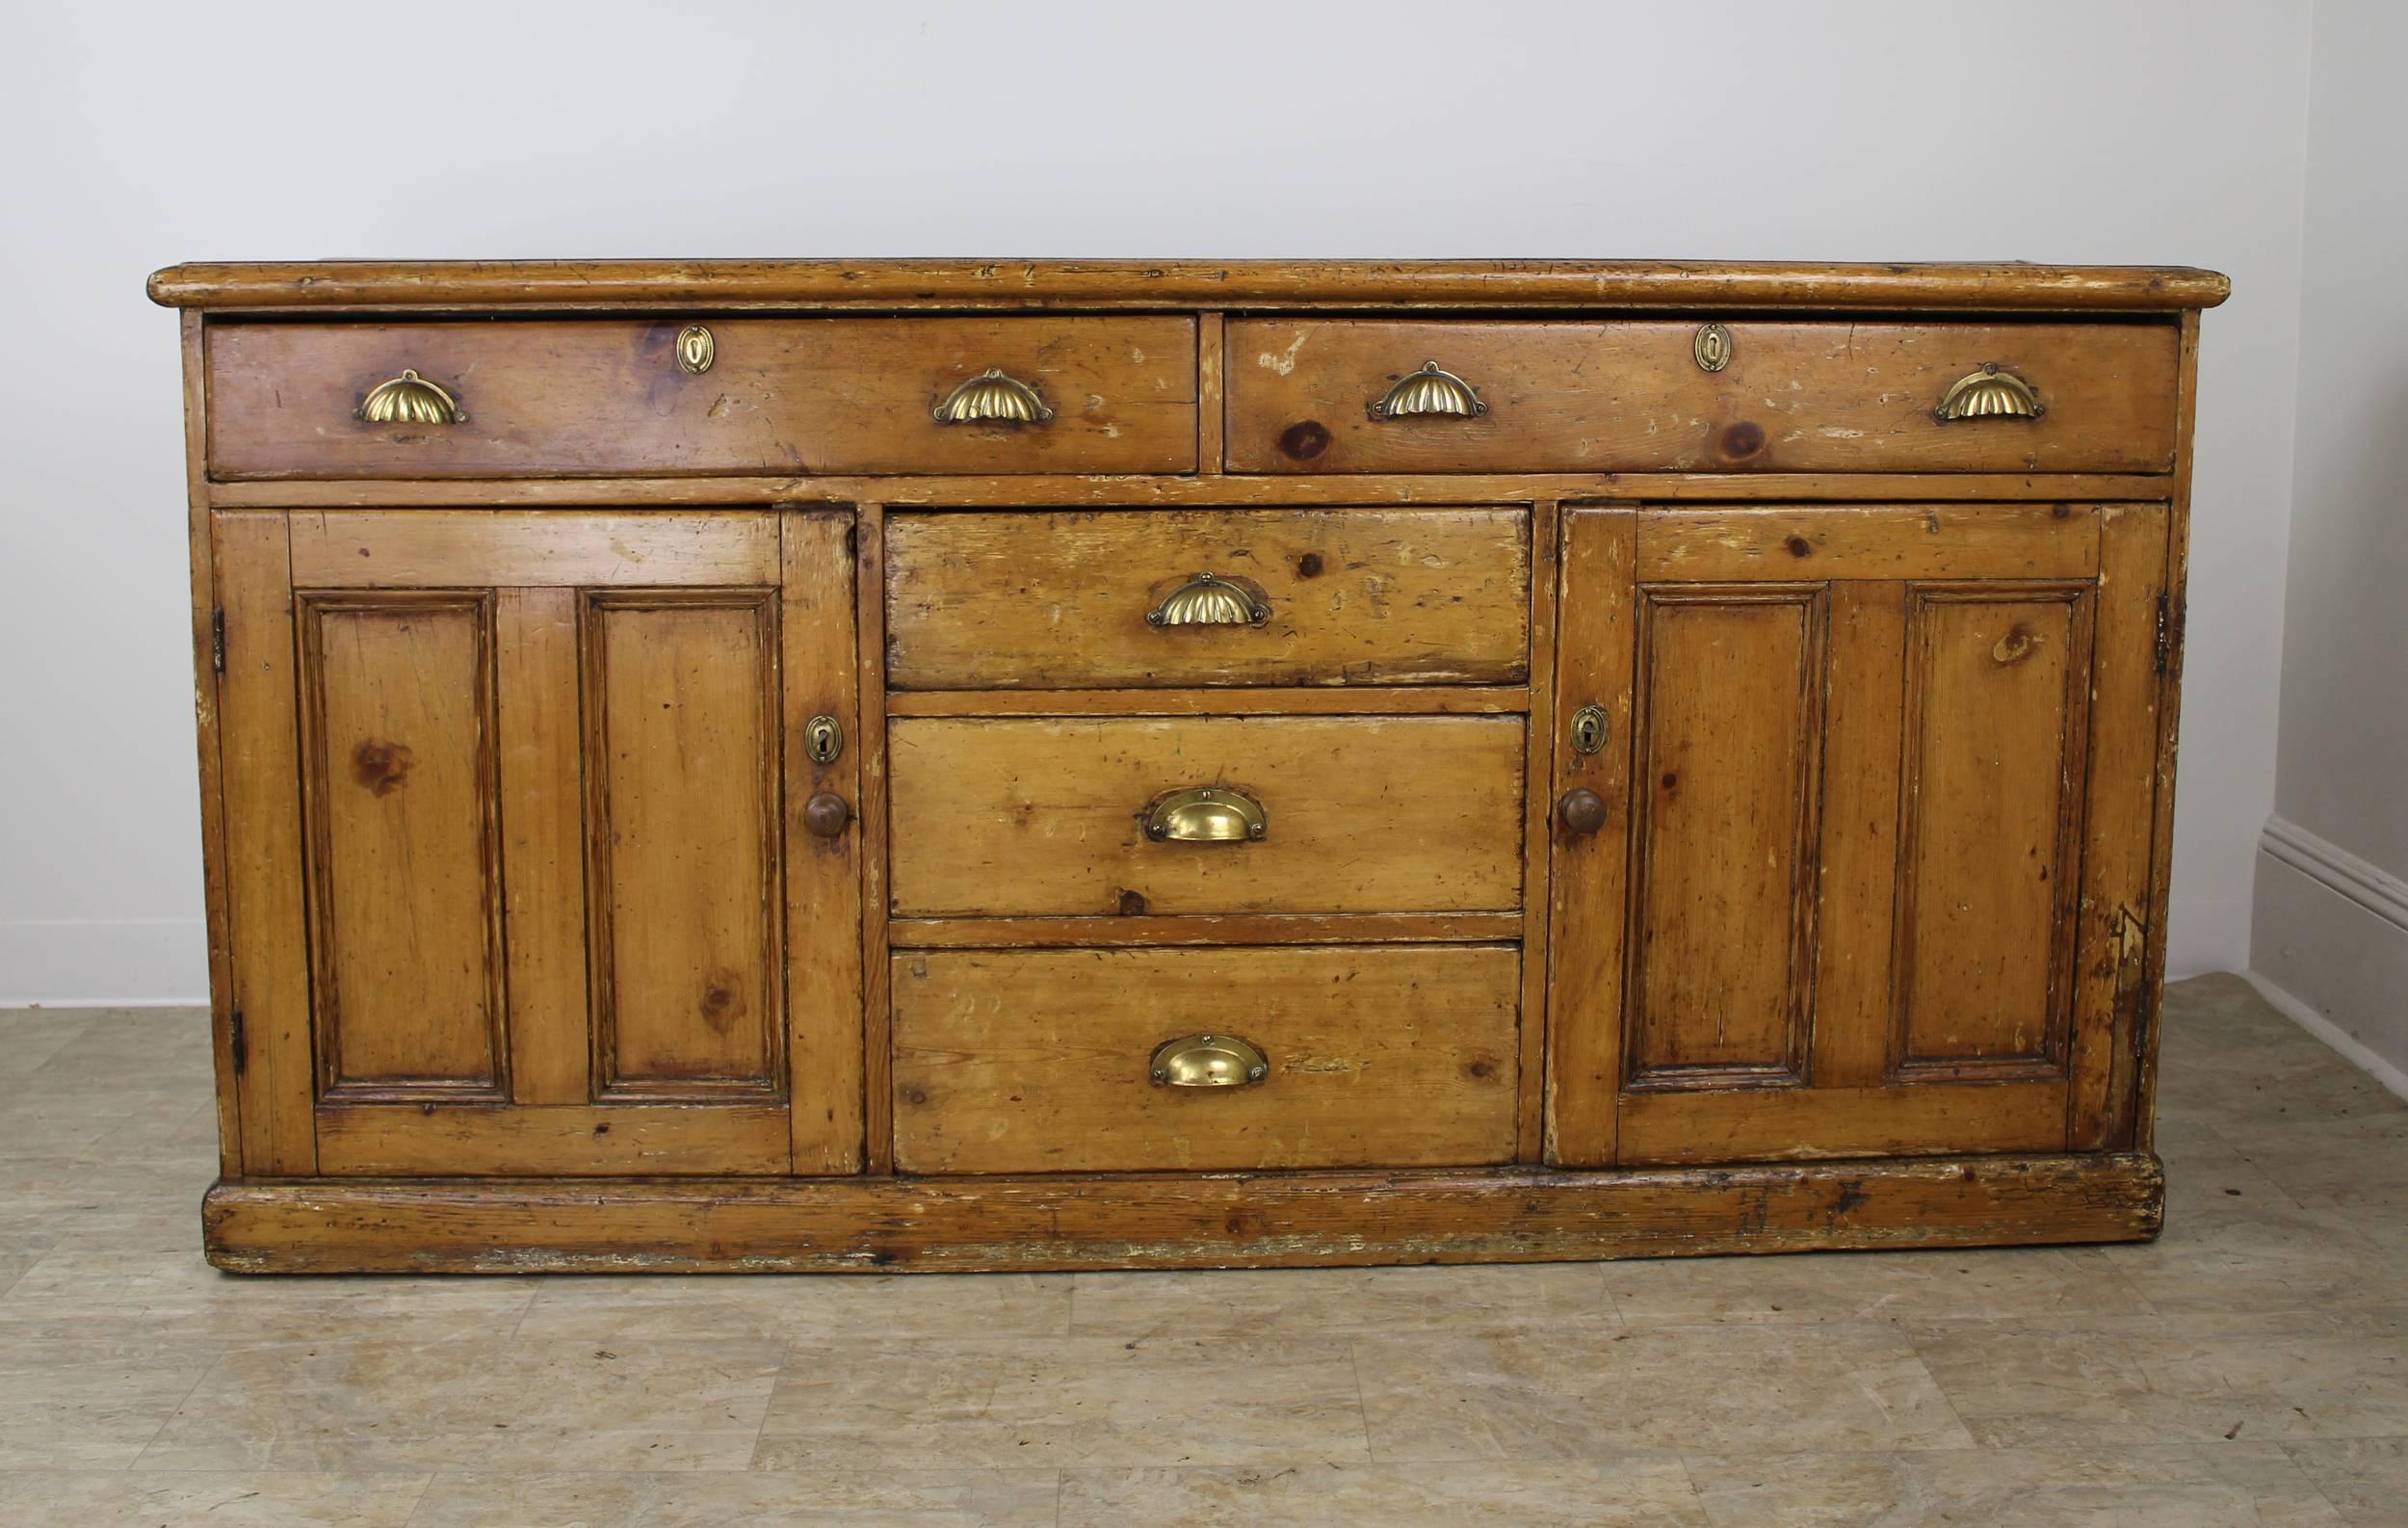 A fabulous Welsh pine cupboard, sideboard or dresser base with some of the most glorious patina and character we have seen. Gorgeous honey colored pine, polished to a glow. Outset panels at either end add a nice design note. All of the five roomy